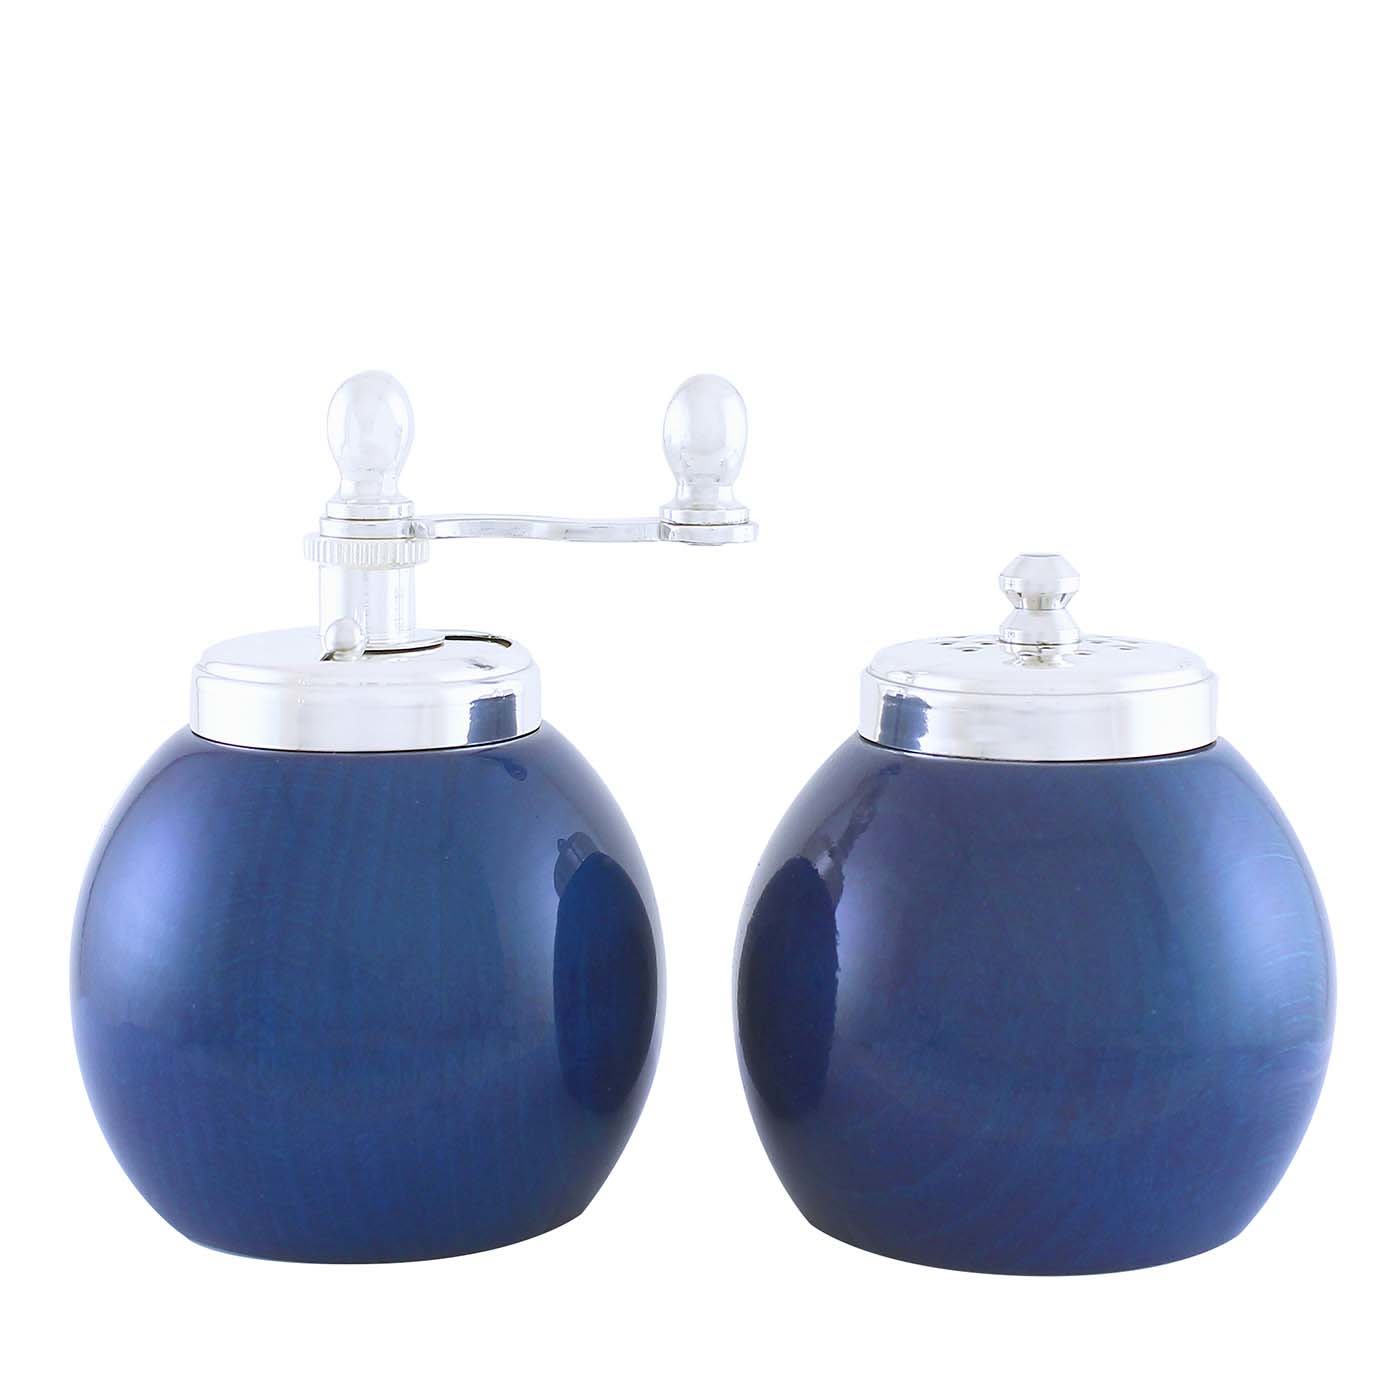 Blue Wood and Silver-Plated Brass Salt Shaker and Pepper Grinder - Chiarugi 1952